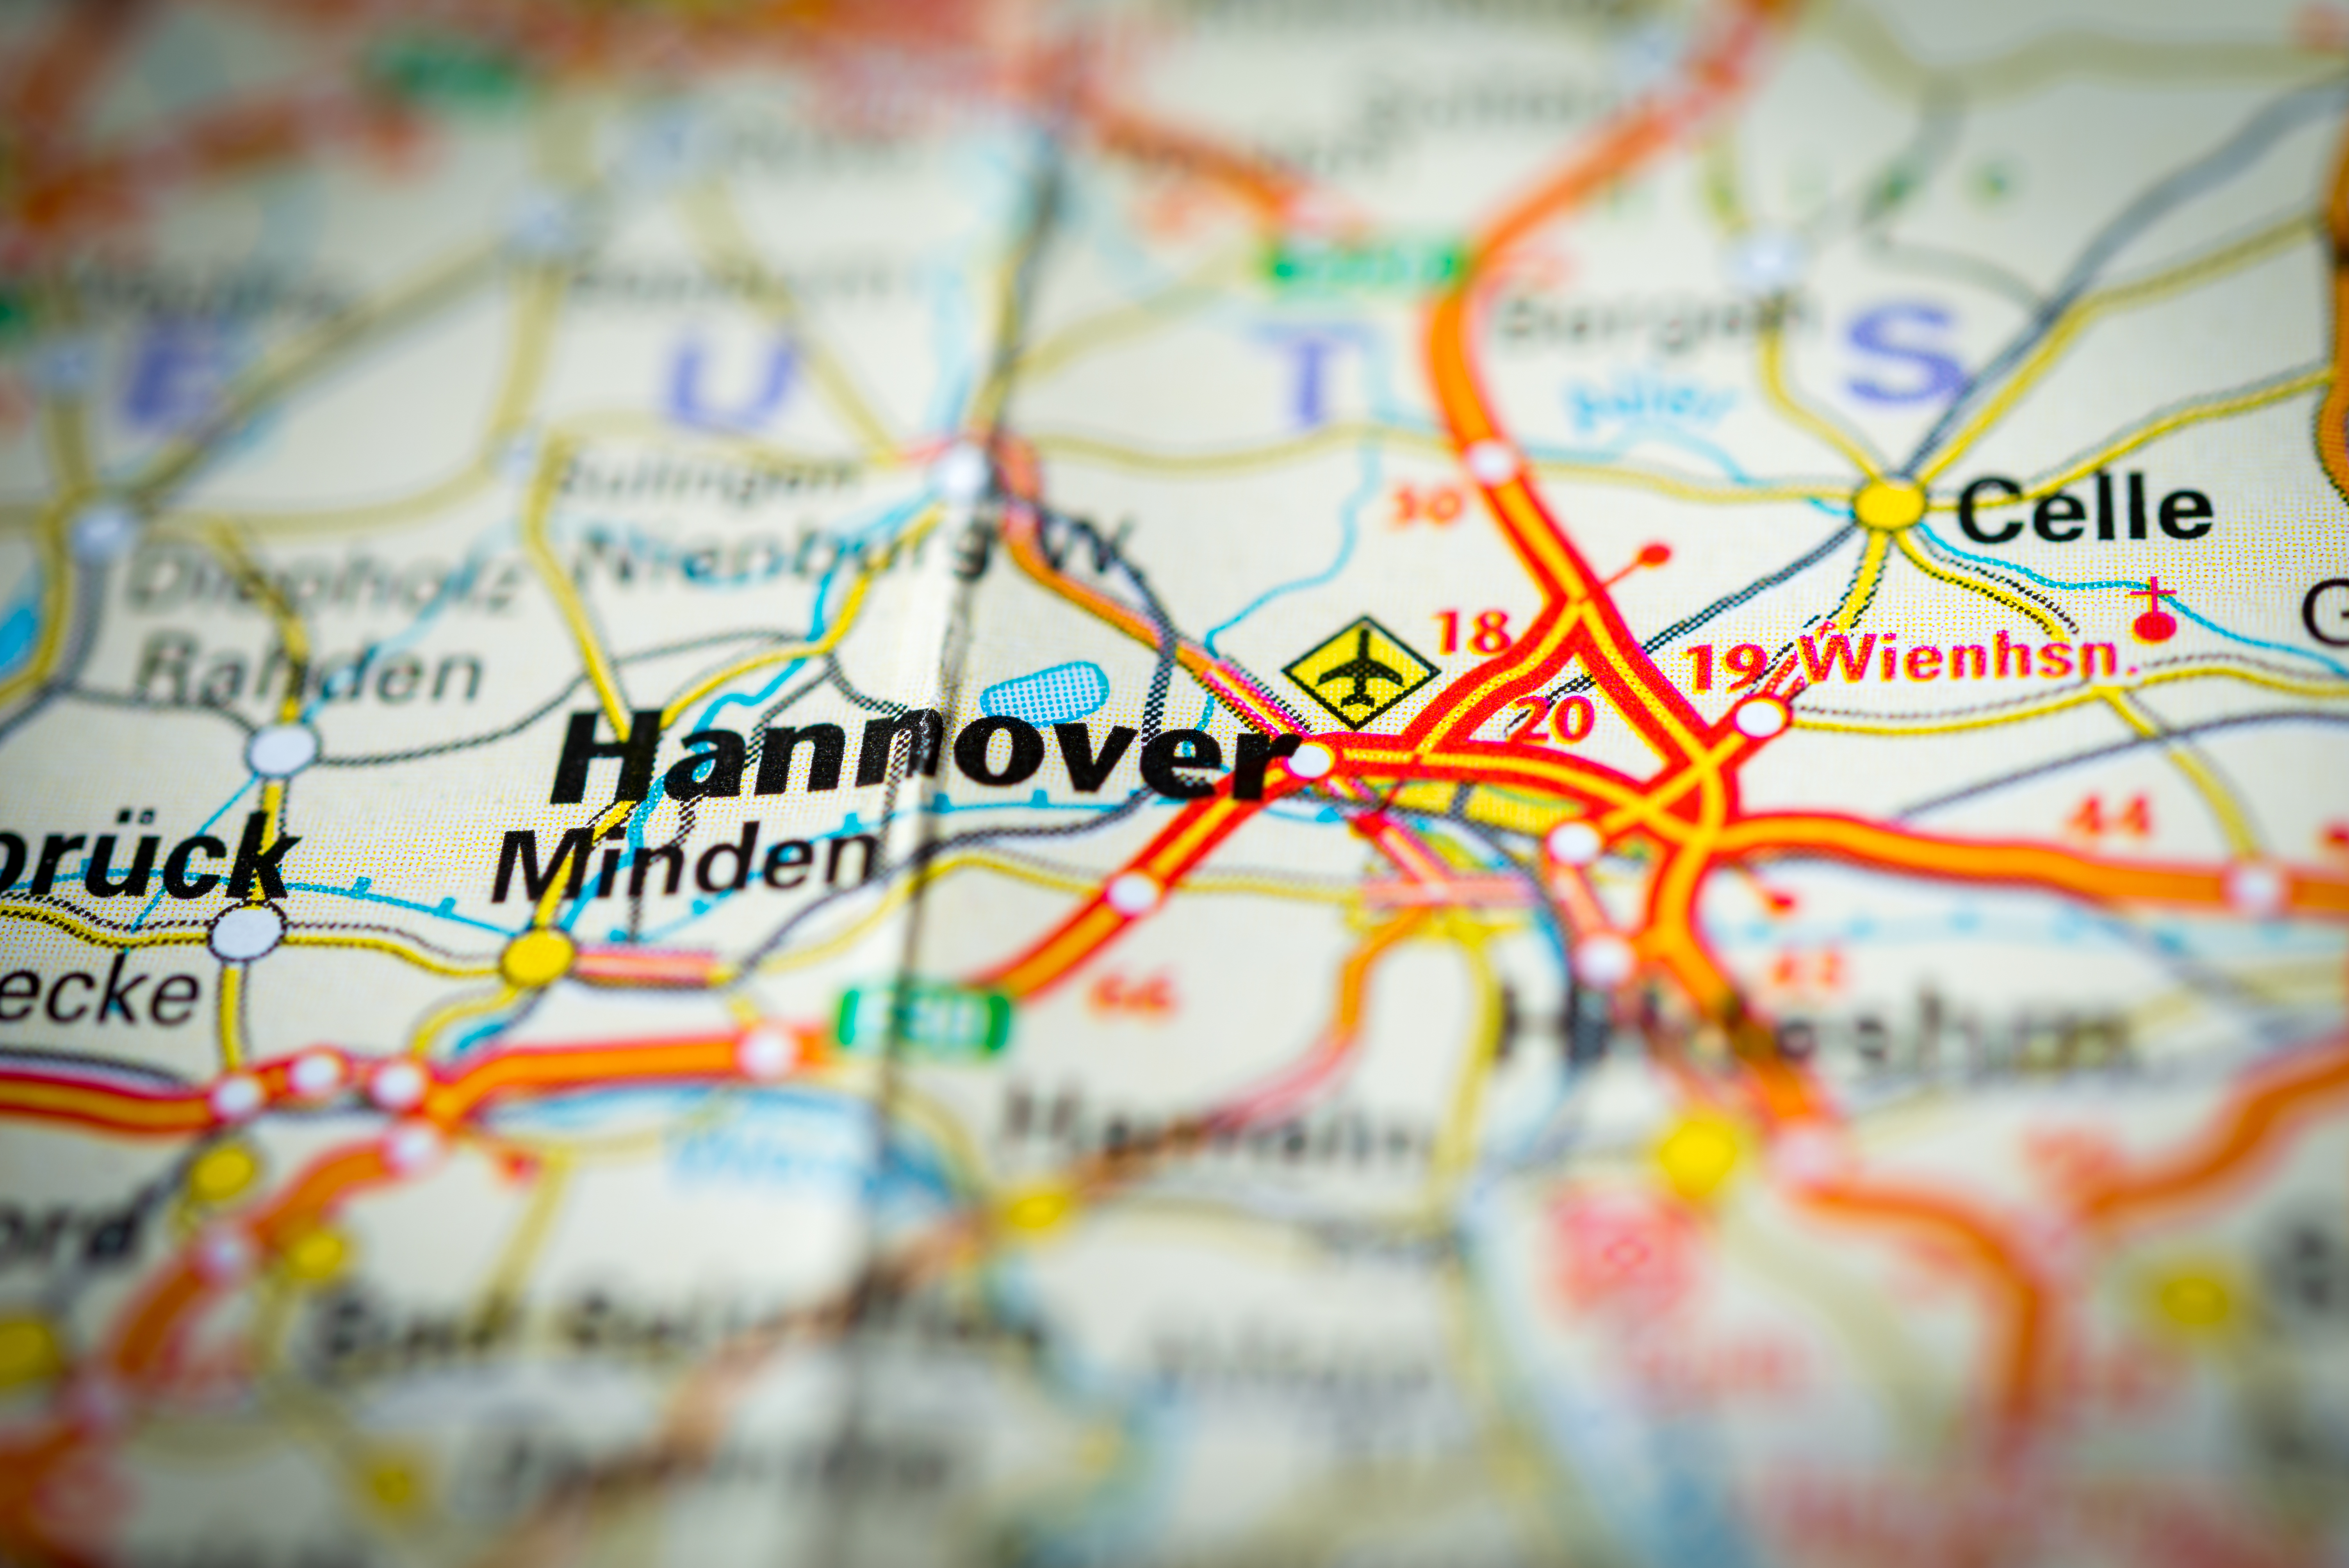 Hannover Airport – the VIP gateway to Germany